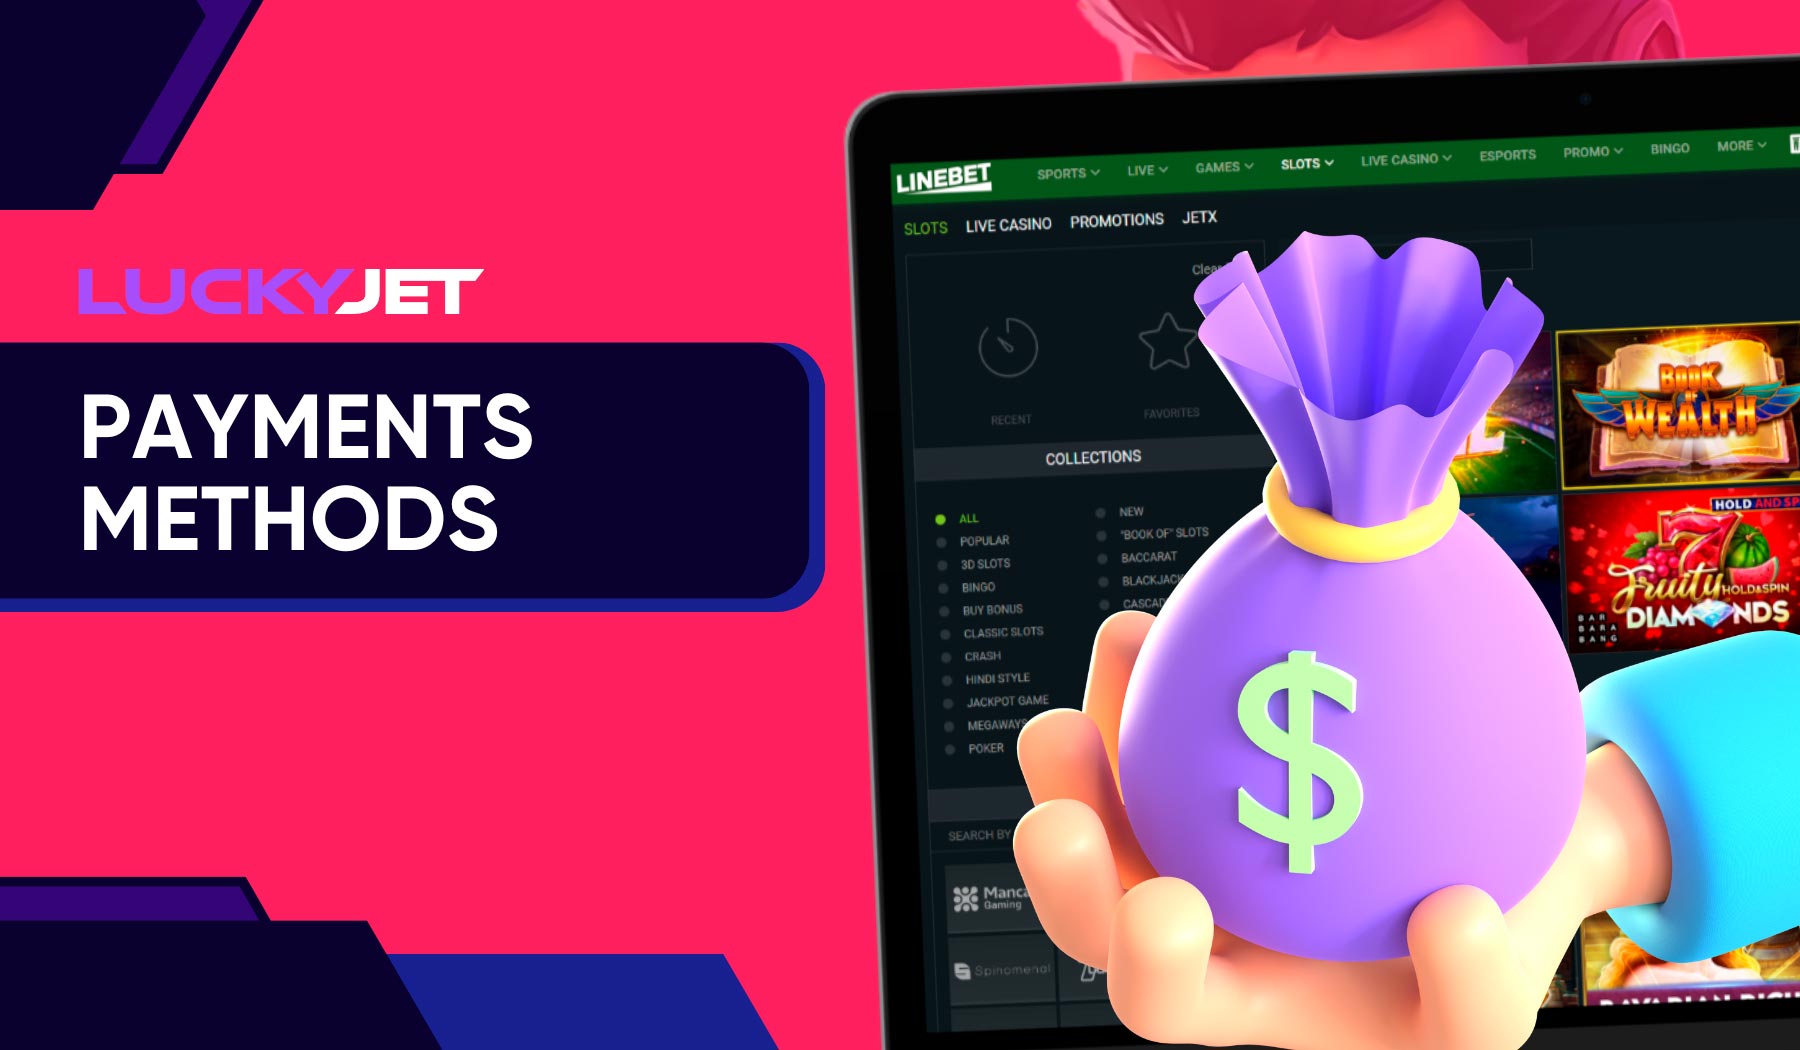 Linebet online casino payment systems